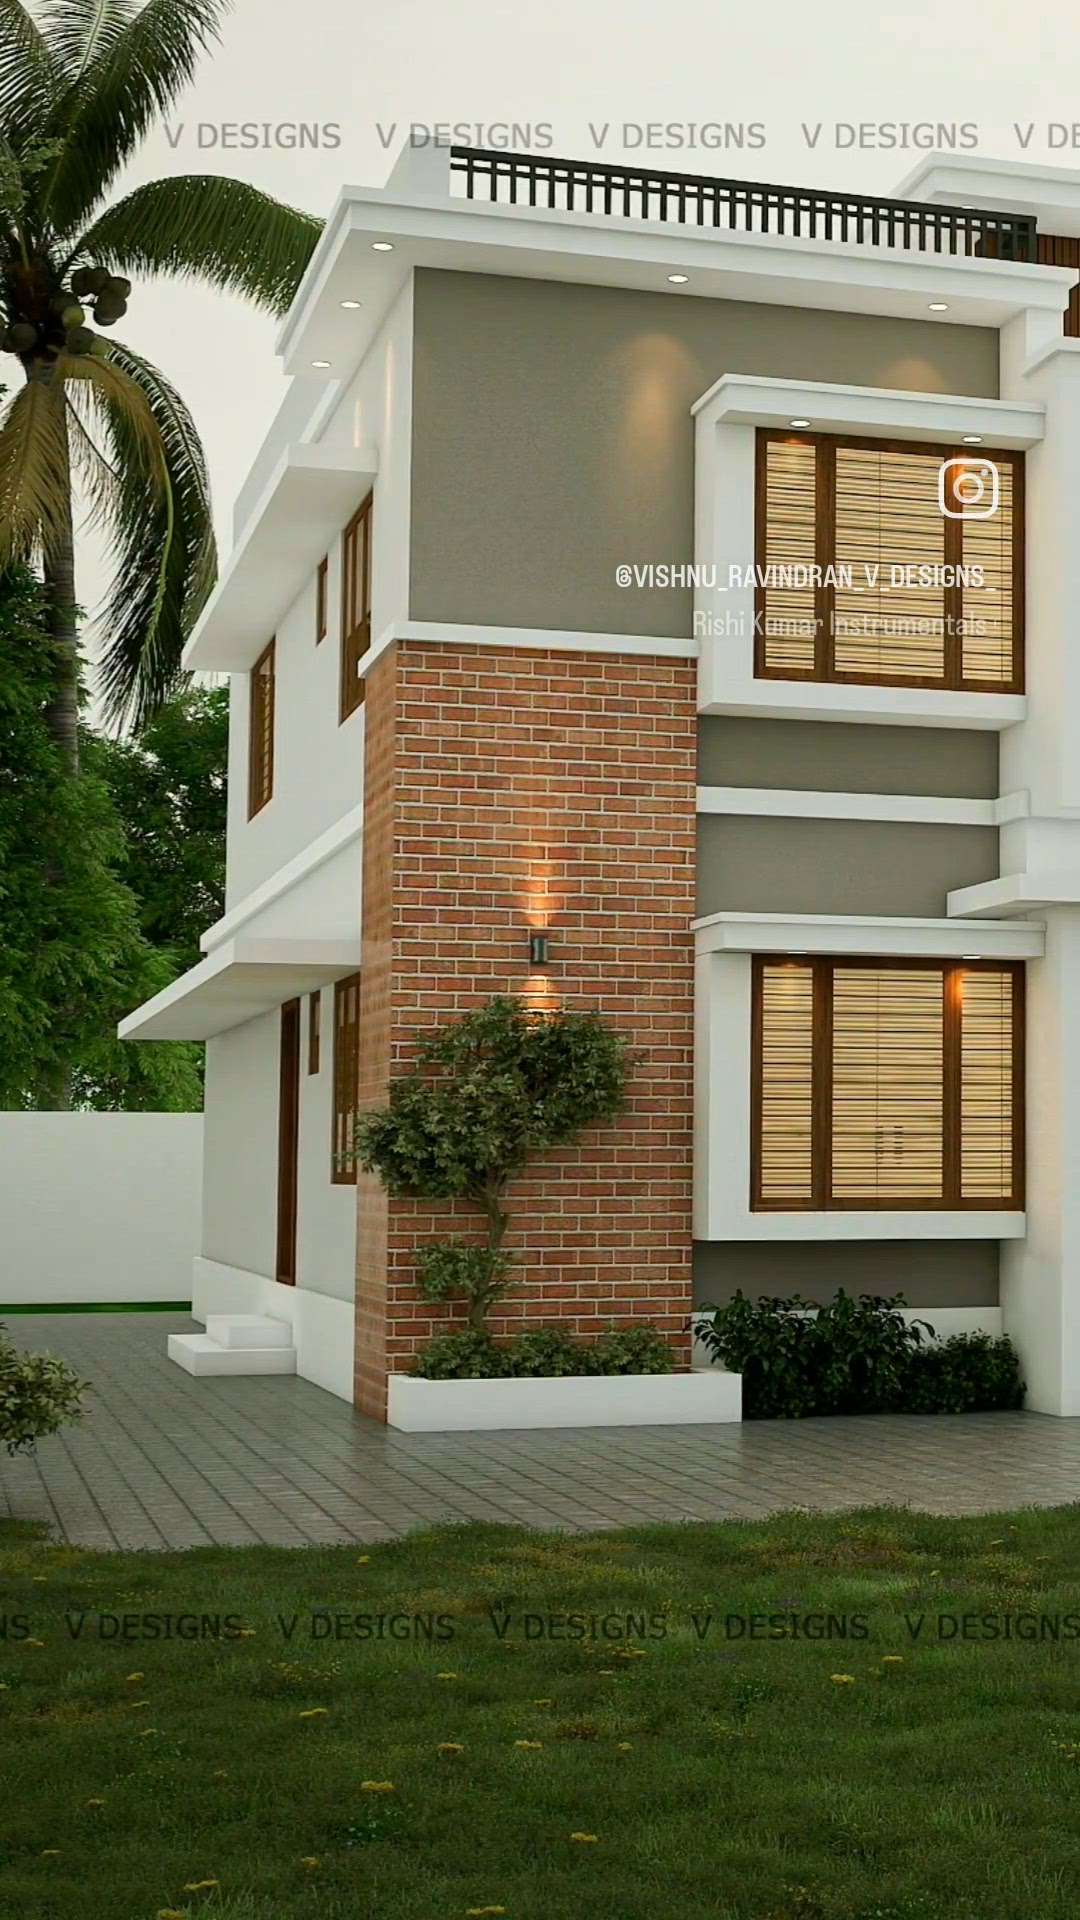 Contemporary style 🏡 details 👇🏻

1700 Sqft
3Bhk home
Location : thrissur

 #keralahomes #keralaarchitecture #homes #homedesigning #homeconcept #hometour #keralaatraction #keralahomedesigns #designideas #designkerala #design #3dvisualizer #3delevation #exteriordesign #exterior #budgethomekerala #budgethomeideas #budgethome #builderskerala #houserenovation #houseelevation #housedesign #vanithaveedu #malayalihome #keralaarchitecture #architecture #architectkerala #designerhome #homedecor